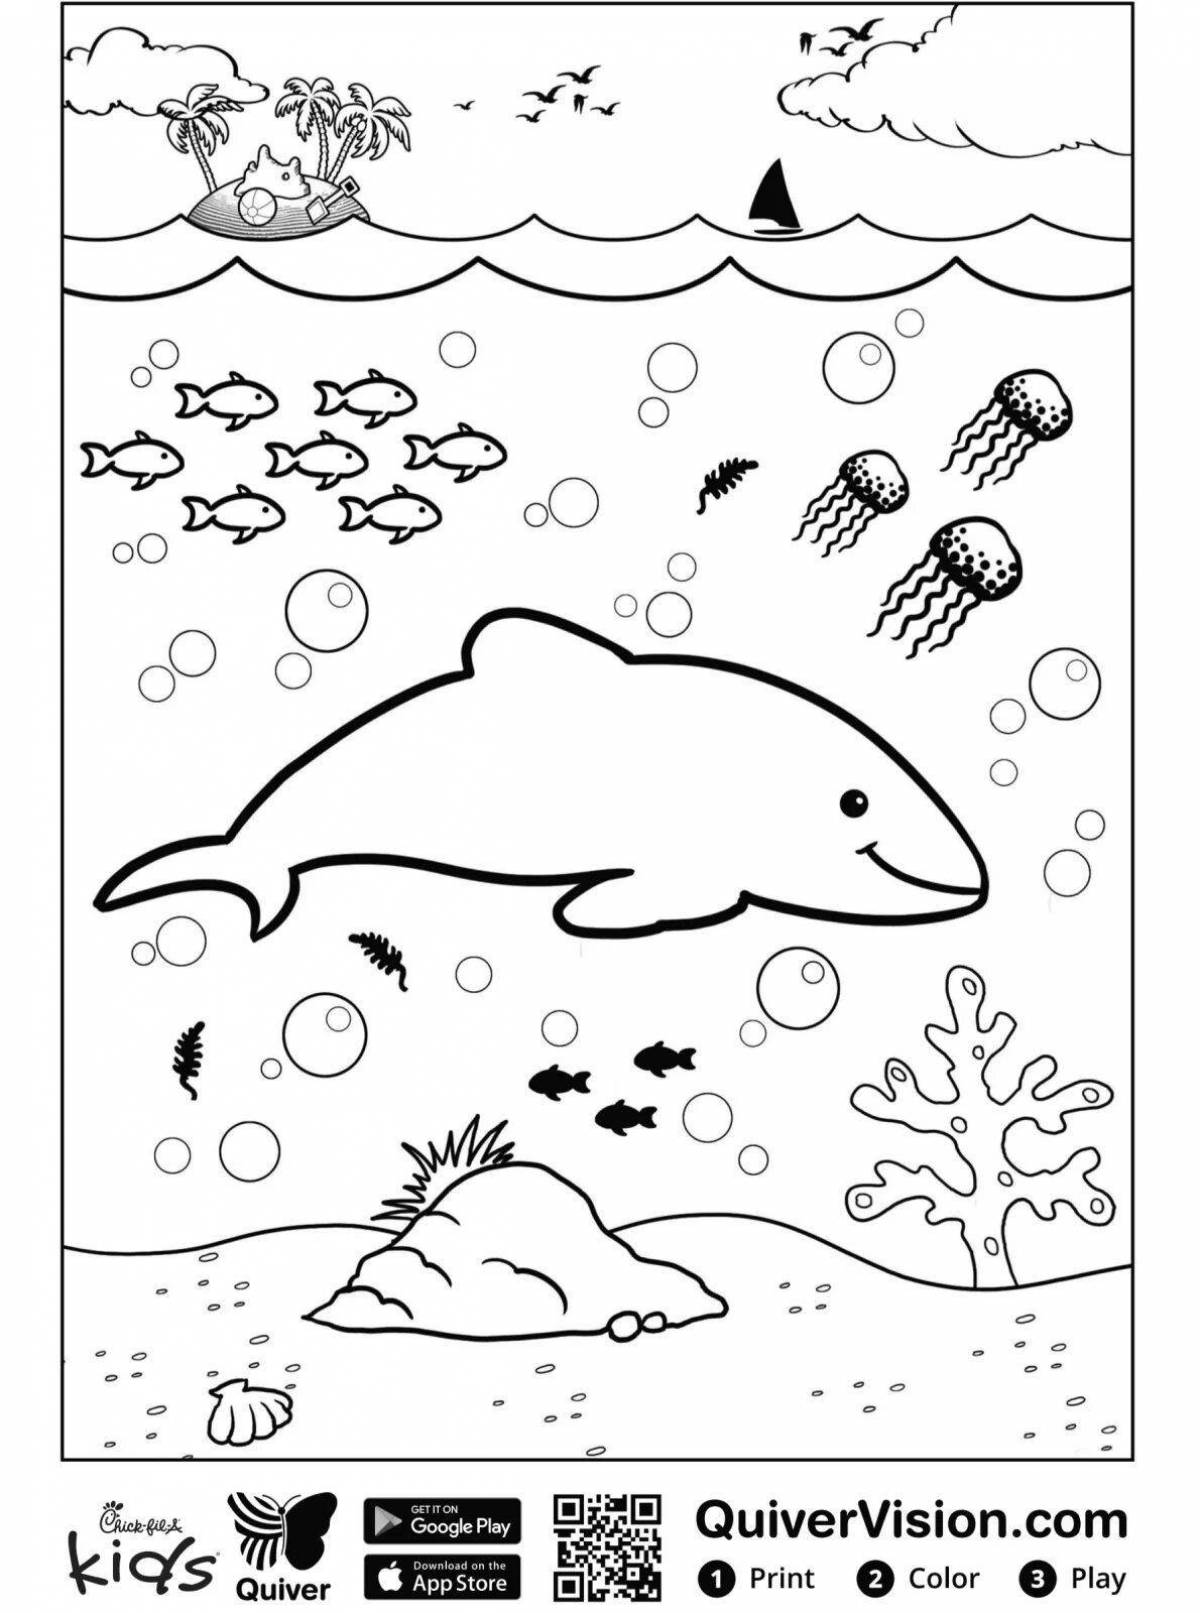 Glitter quiver coloring page